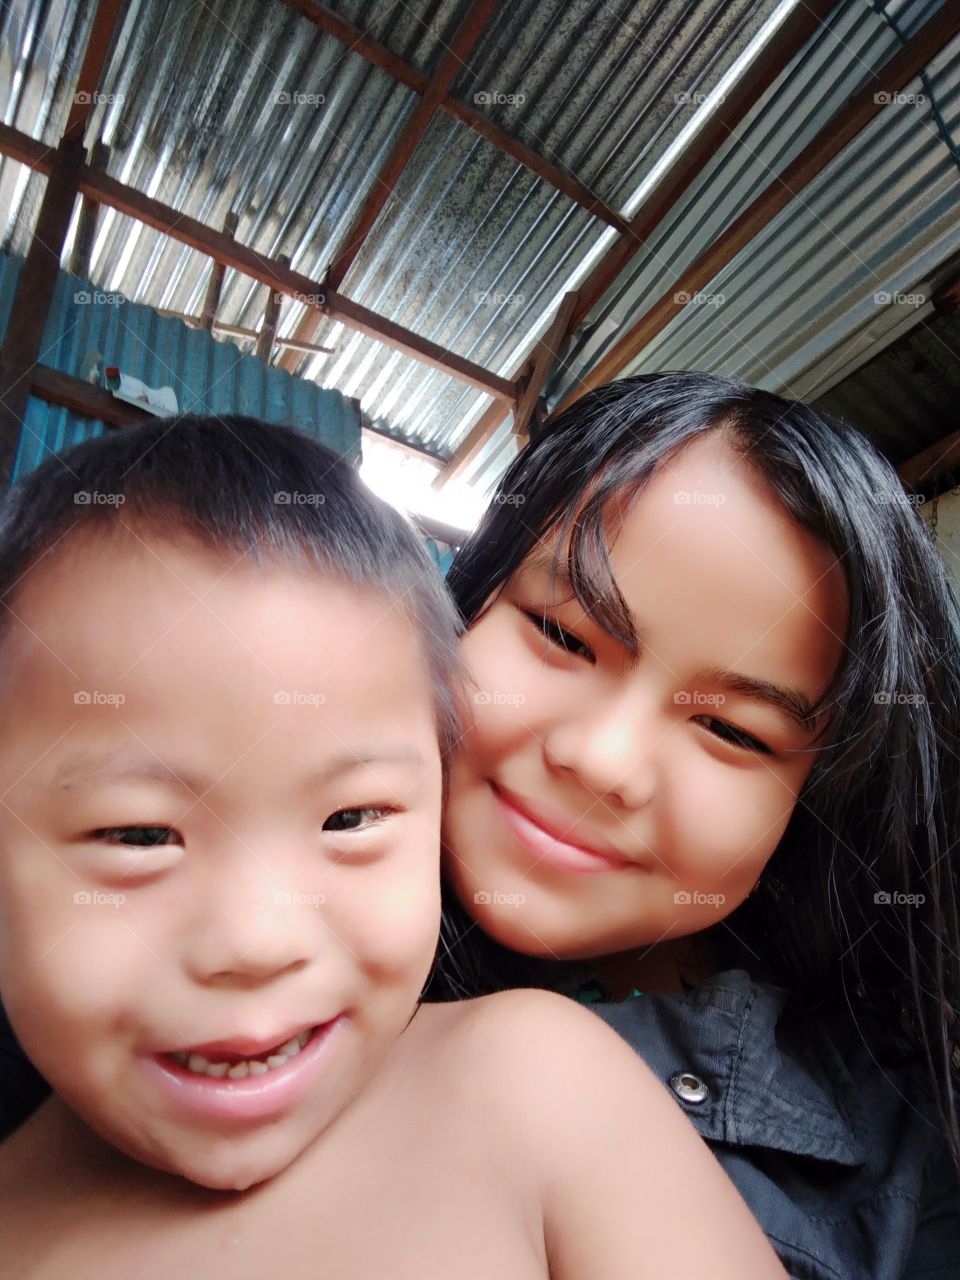 Two loving faces of a sister and her younger brother of the same parent at Langjing Achouba Makha Leikai, Imphal, Manipur, a state in India.